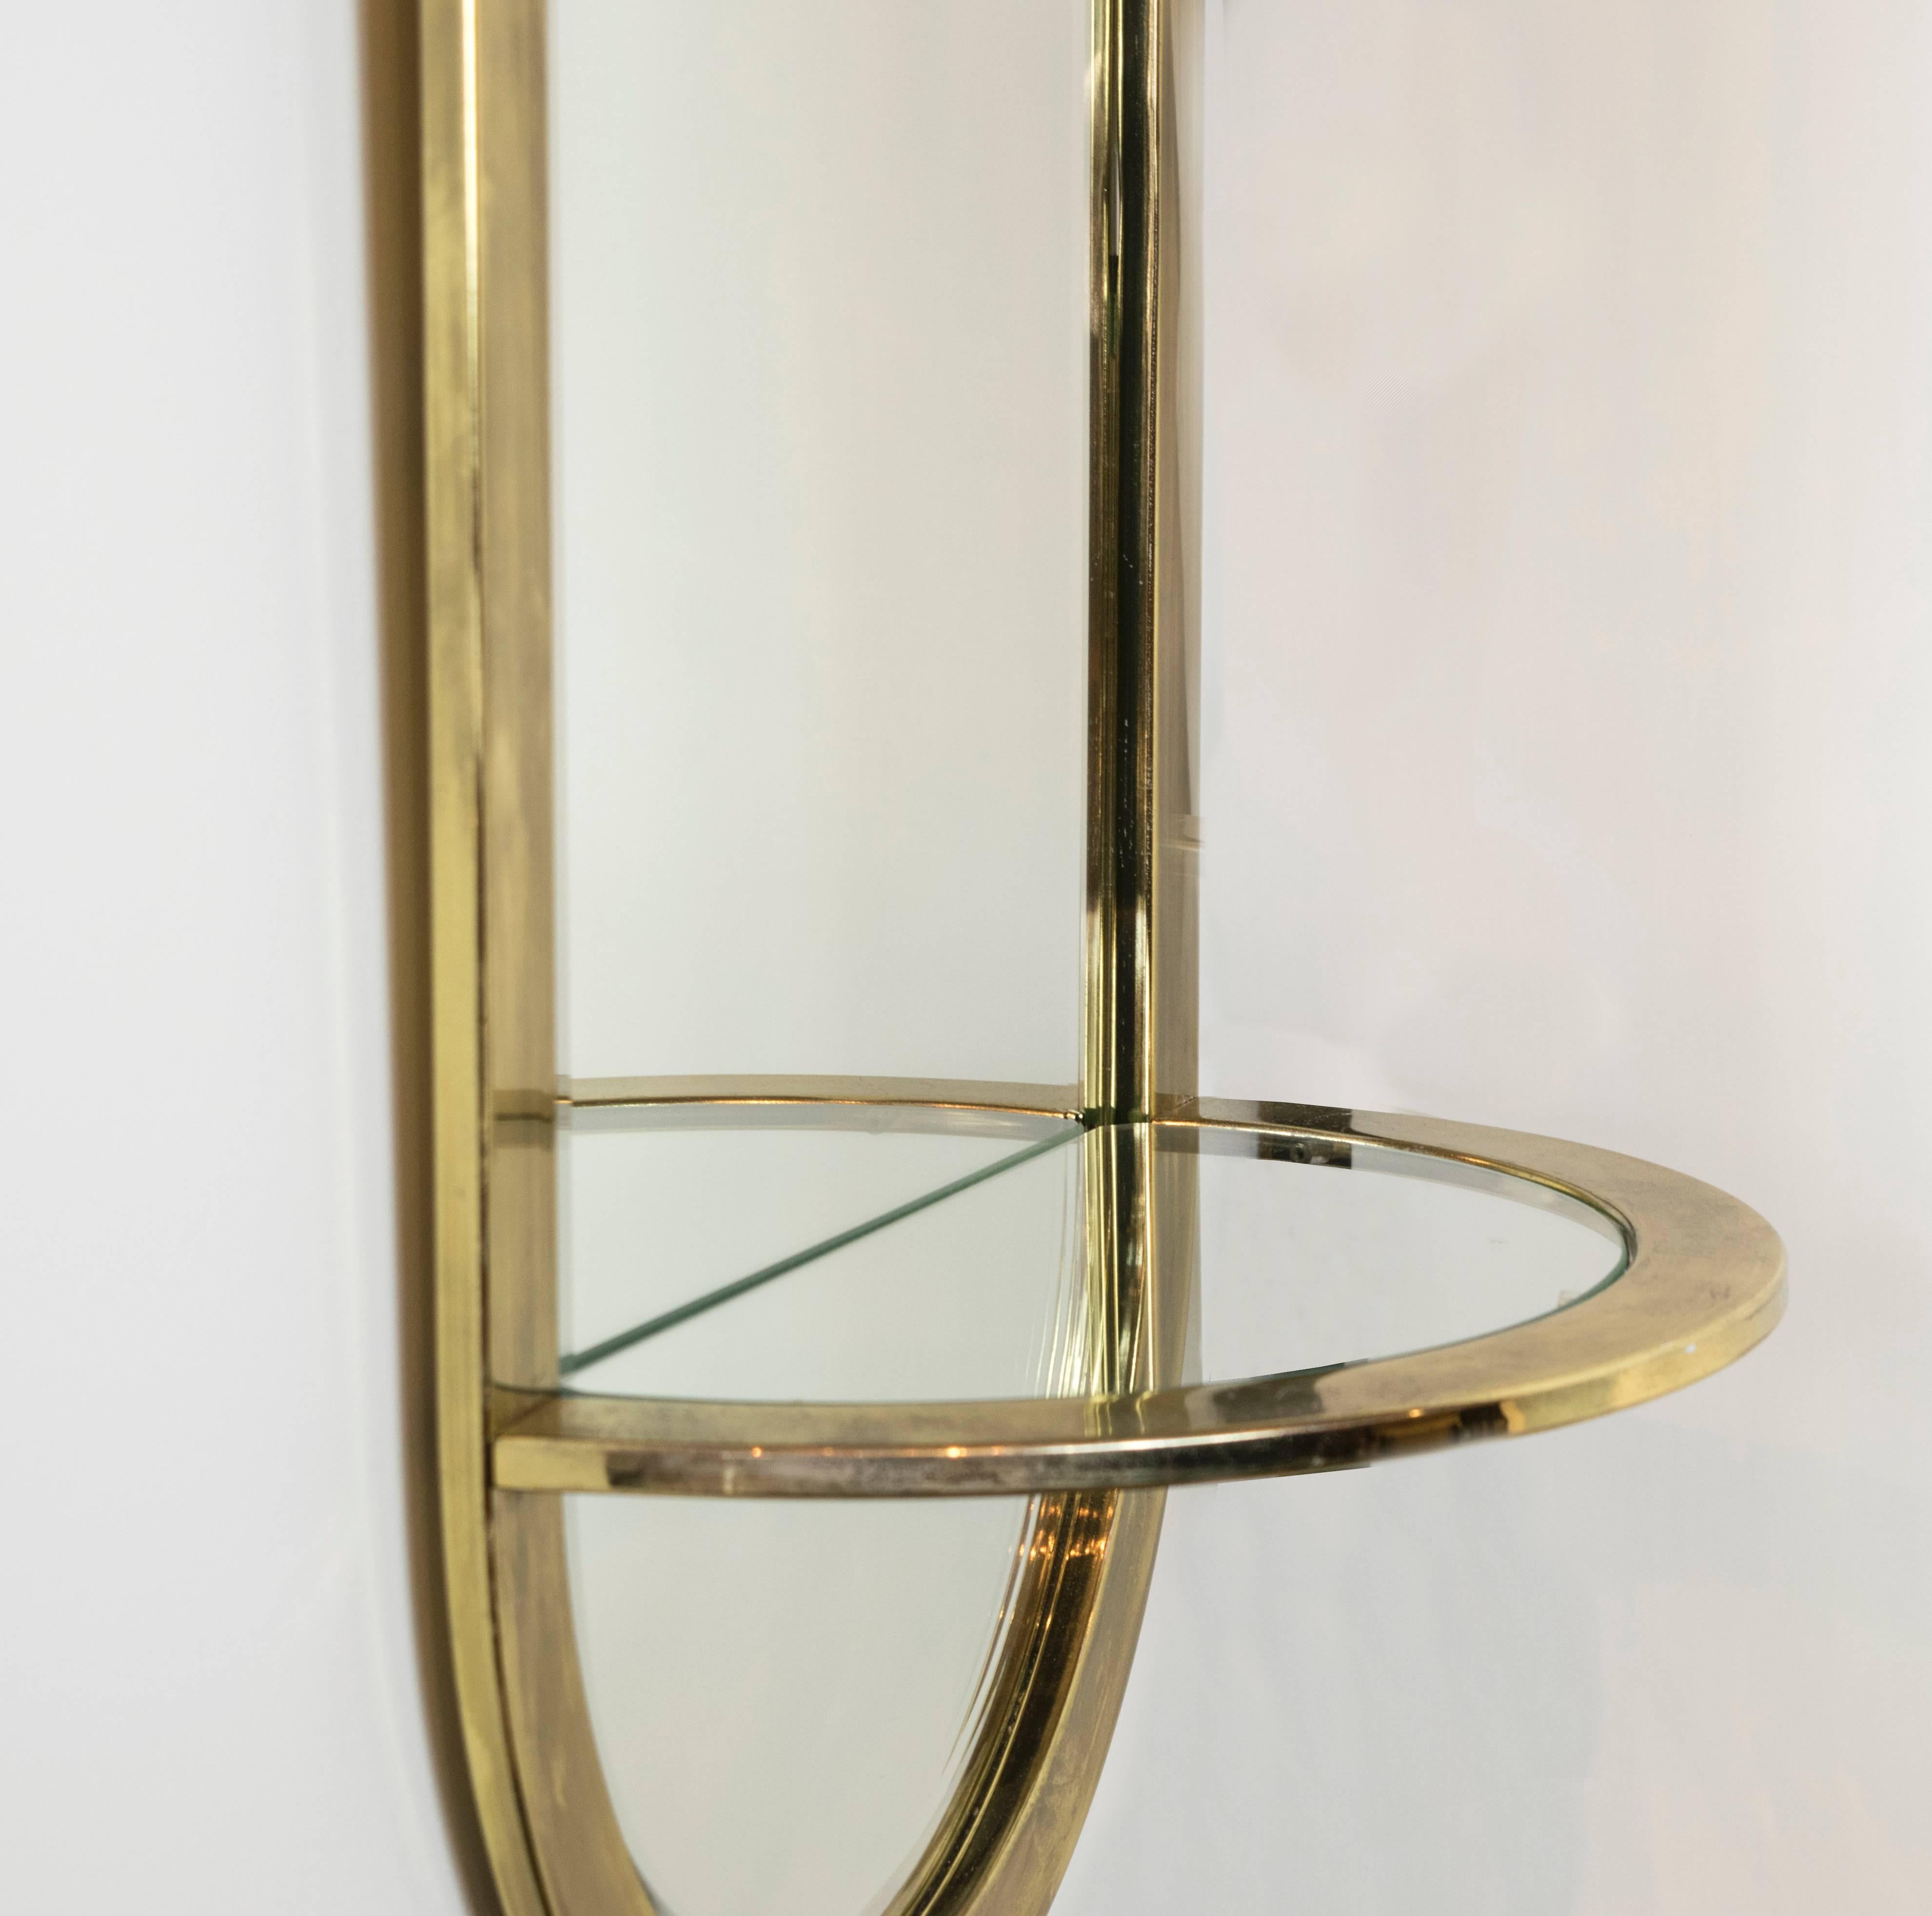 American DIA Brass Racetrack Shaped Mirror with Attached Shelf